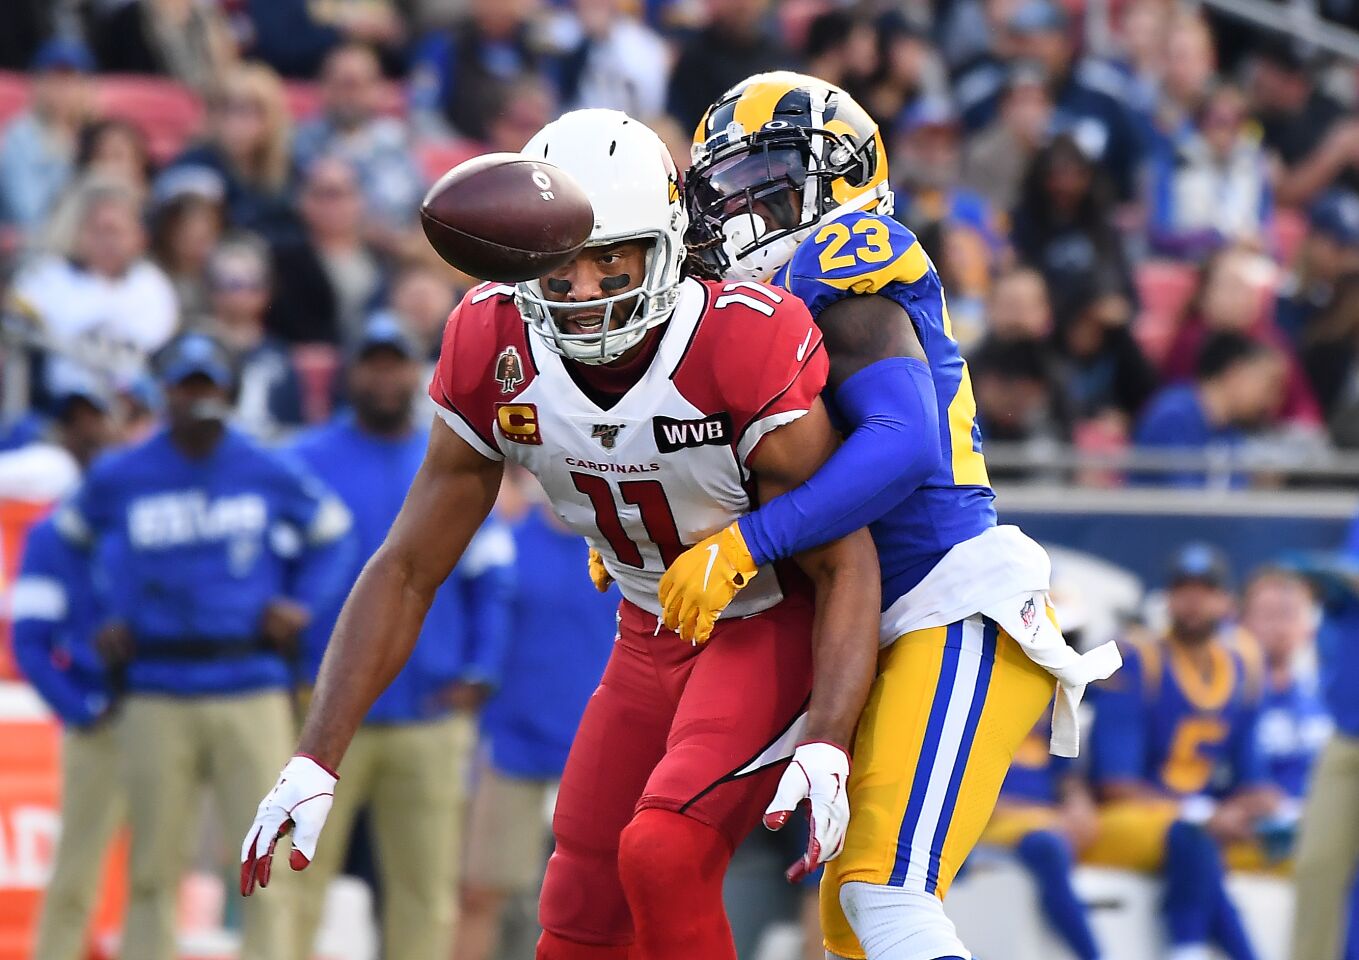 Rams cornerback Nickell Robey-Coleman prevents Cardinals receiver Larry Fitzgerald from making a catch during the second quarter.